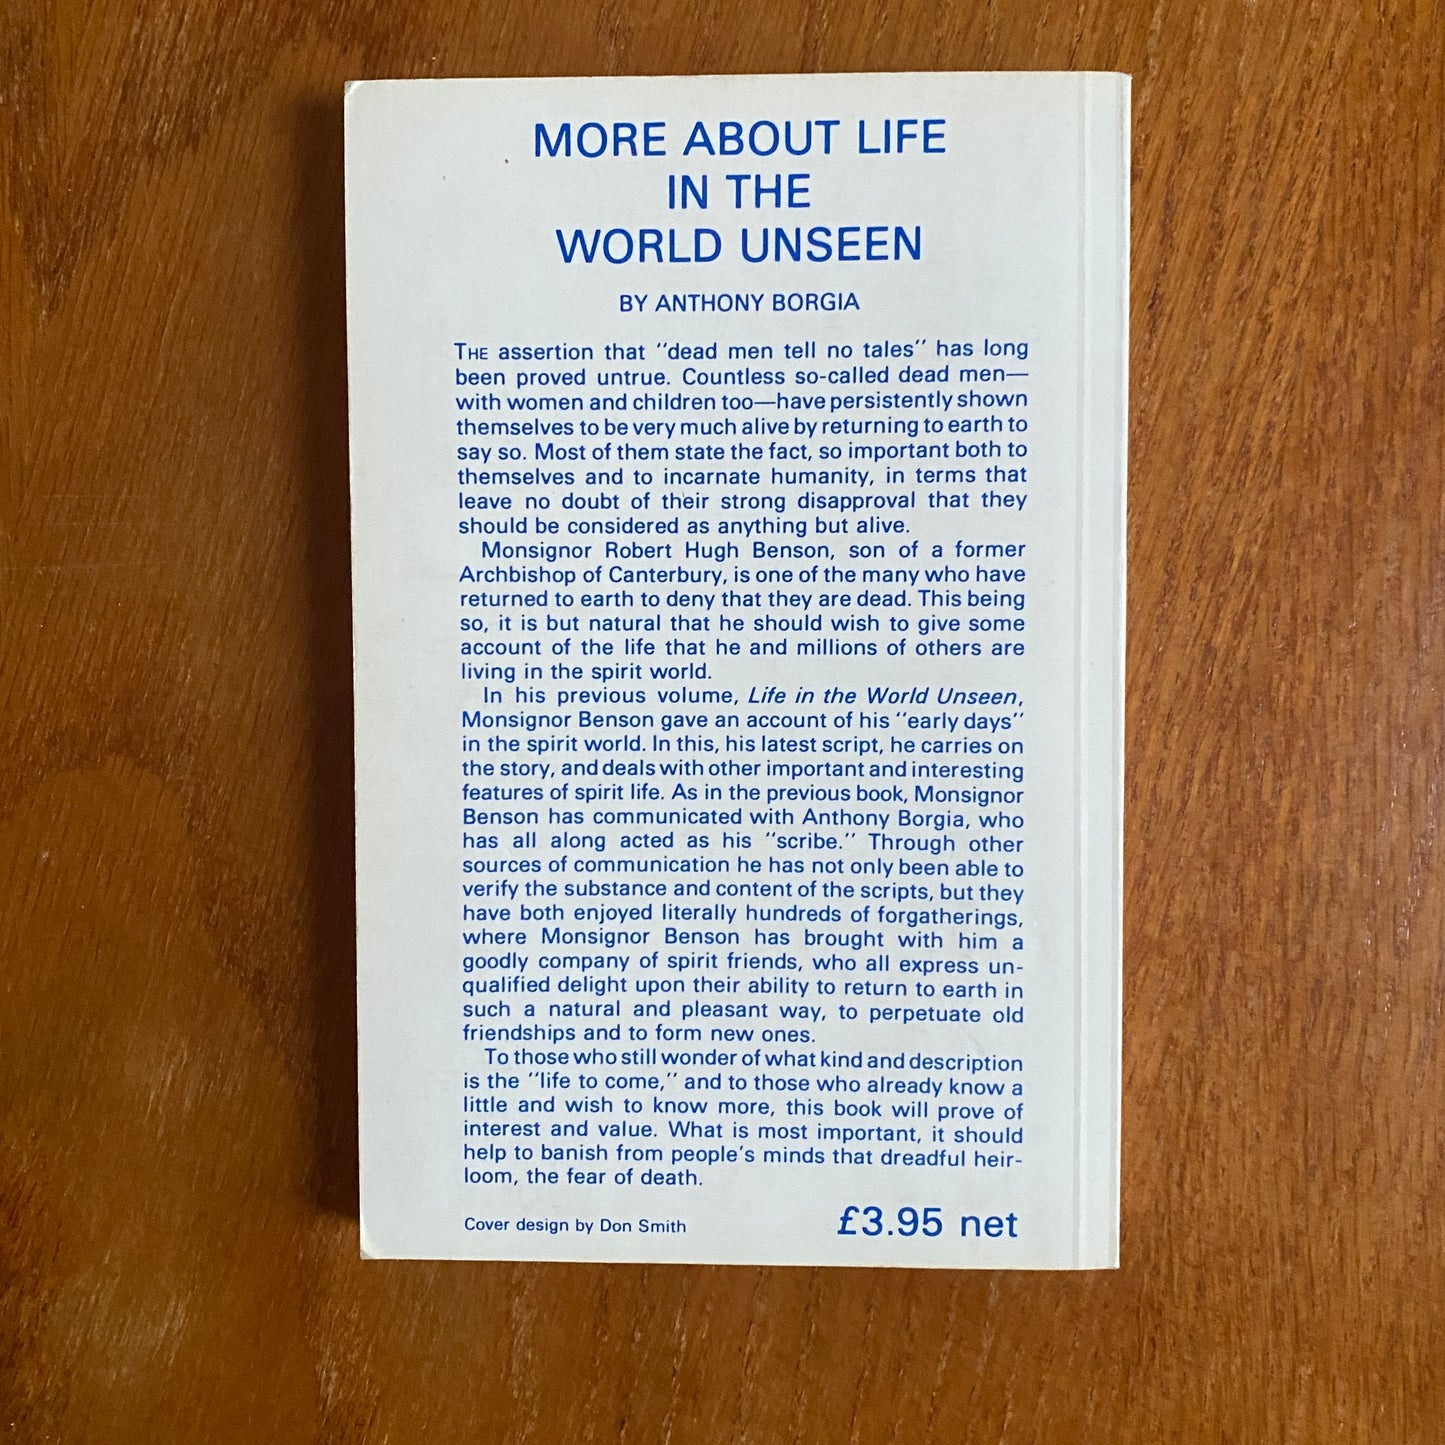 More About Life In The Unseen World - Anthony Borgia